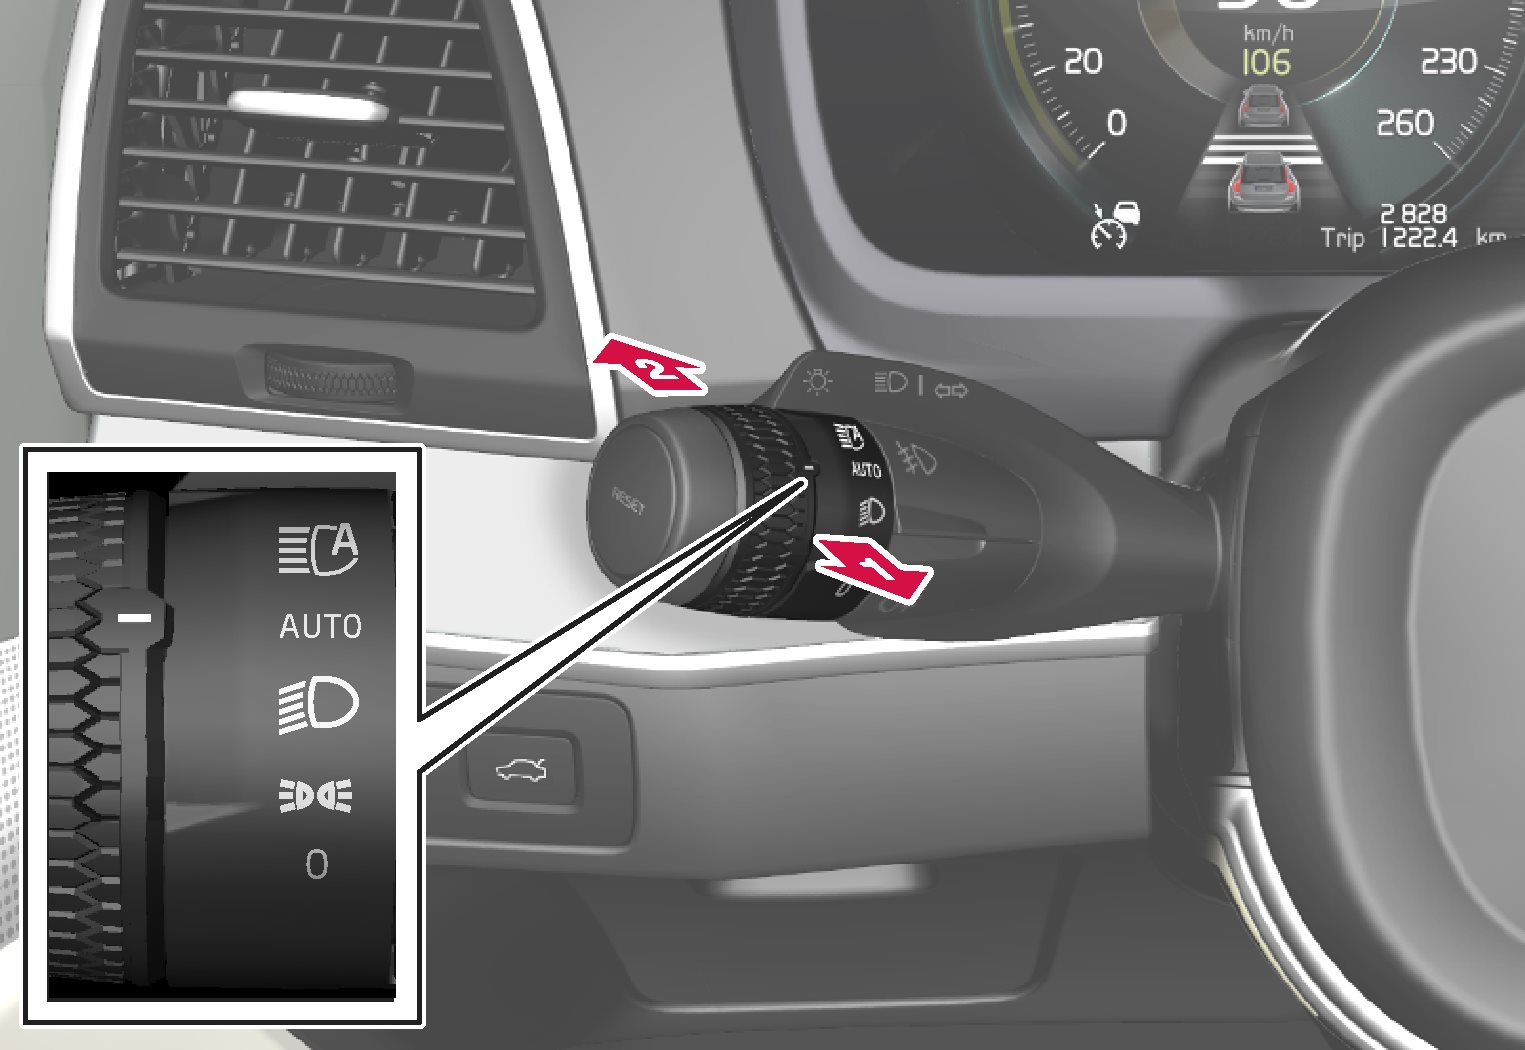 Steering wheel stalk switch with rotating ring.